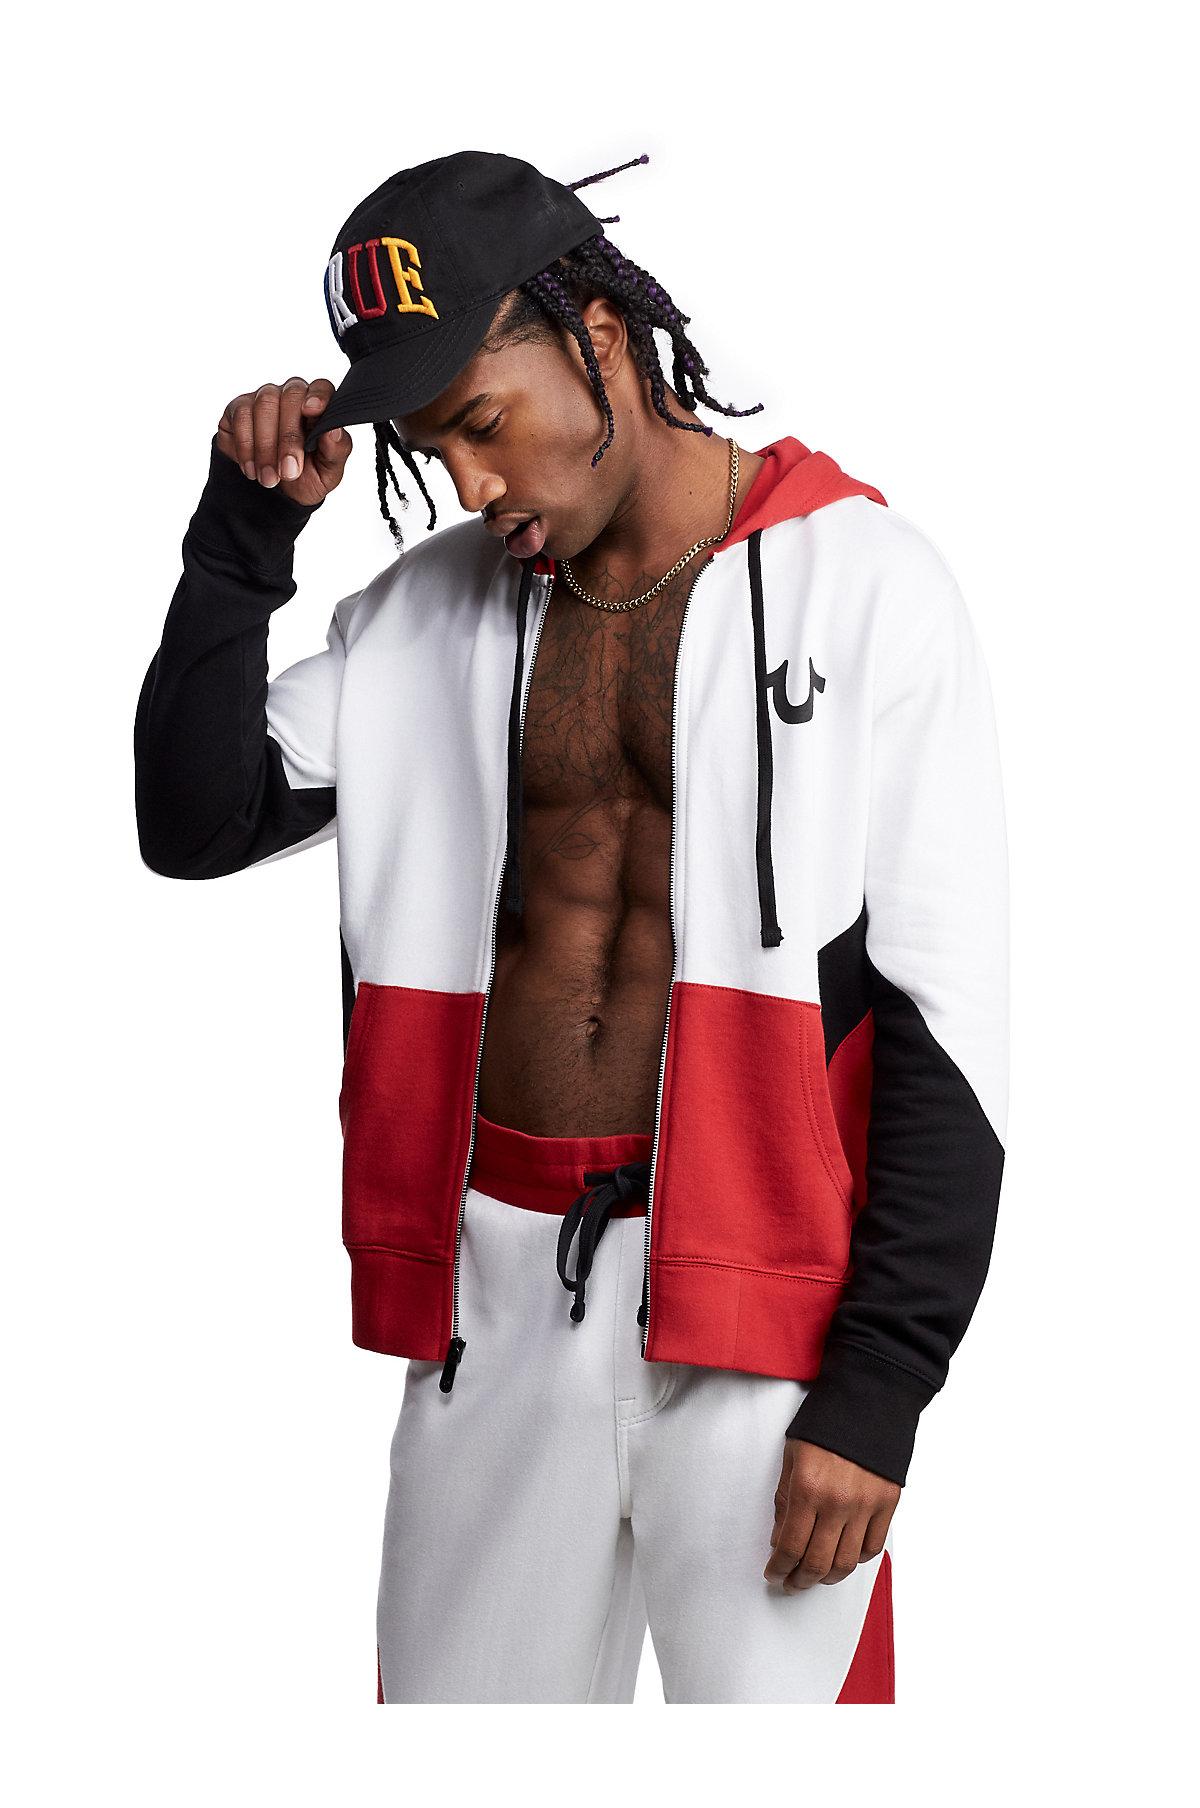 true religion red and white hoodie